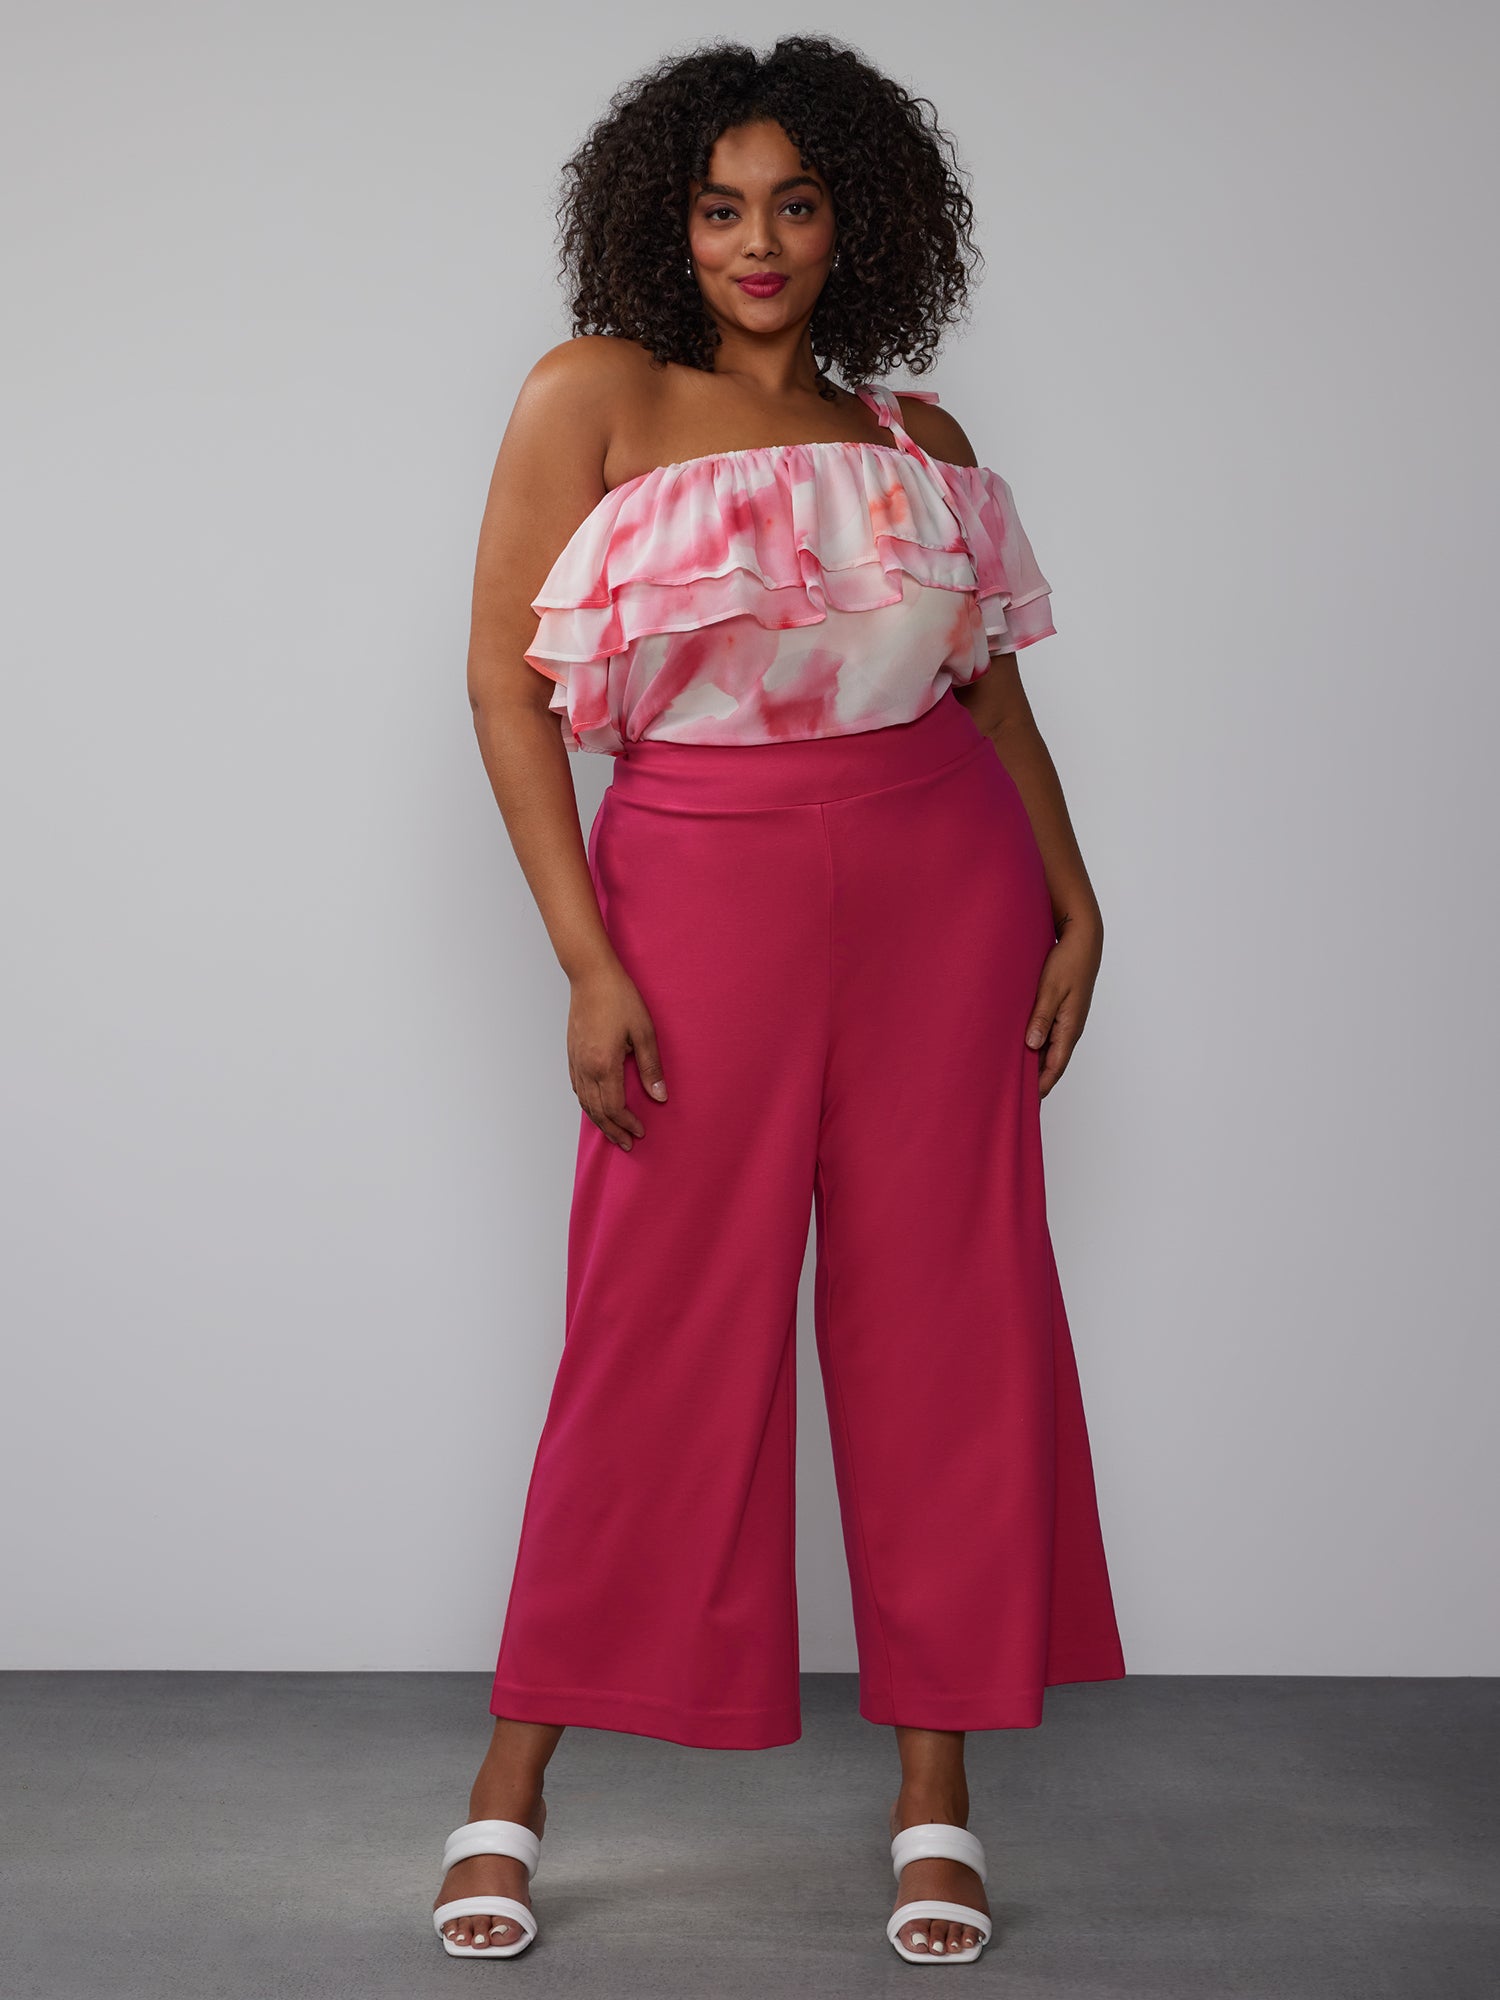 Limelight - Pair your western tops with this spectacular bottom! Shop  amazing pants from Limelight stores or online. Rs. 1,799 - Printed Cotton  Pants - W1134TR: Pink Shop pink bottom here: https://bit.ly/3QWjELC #